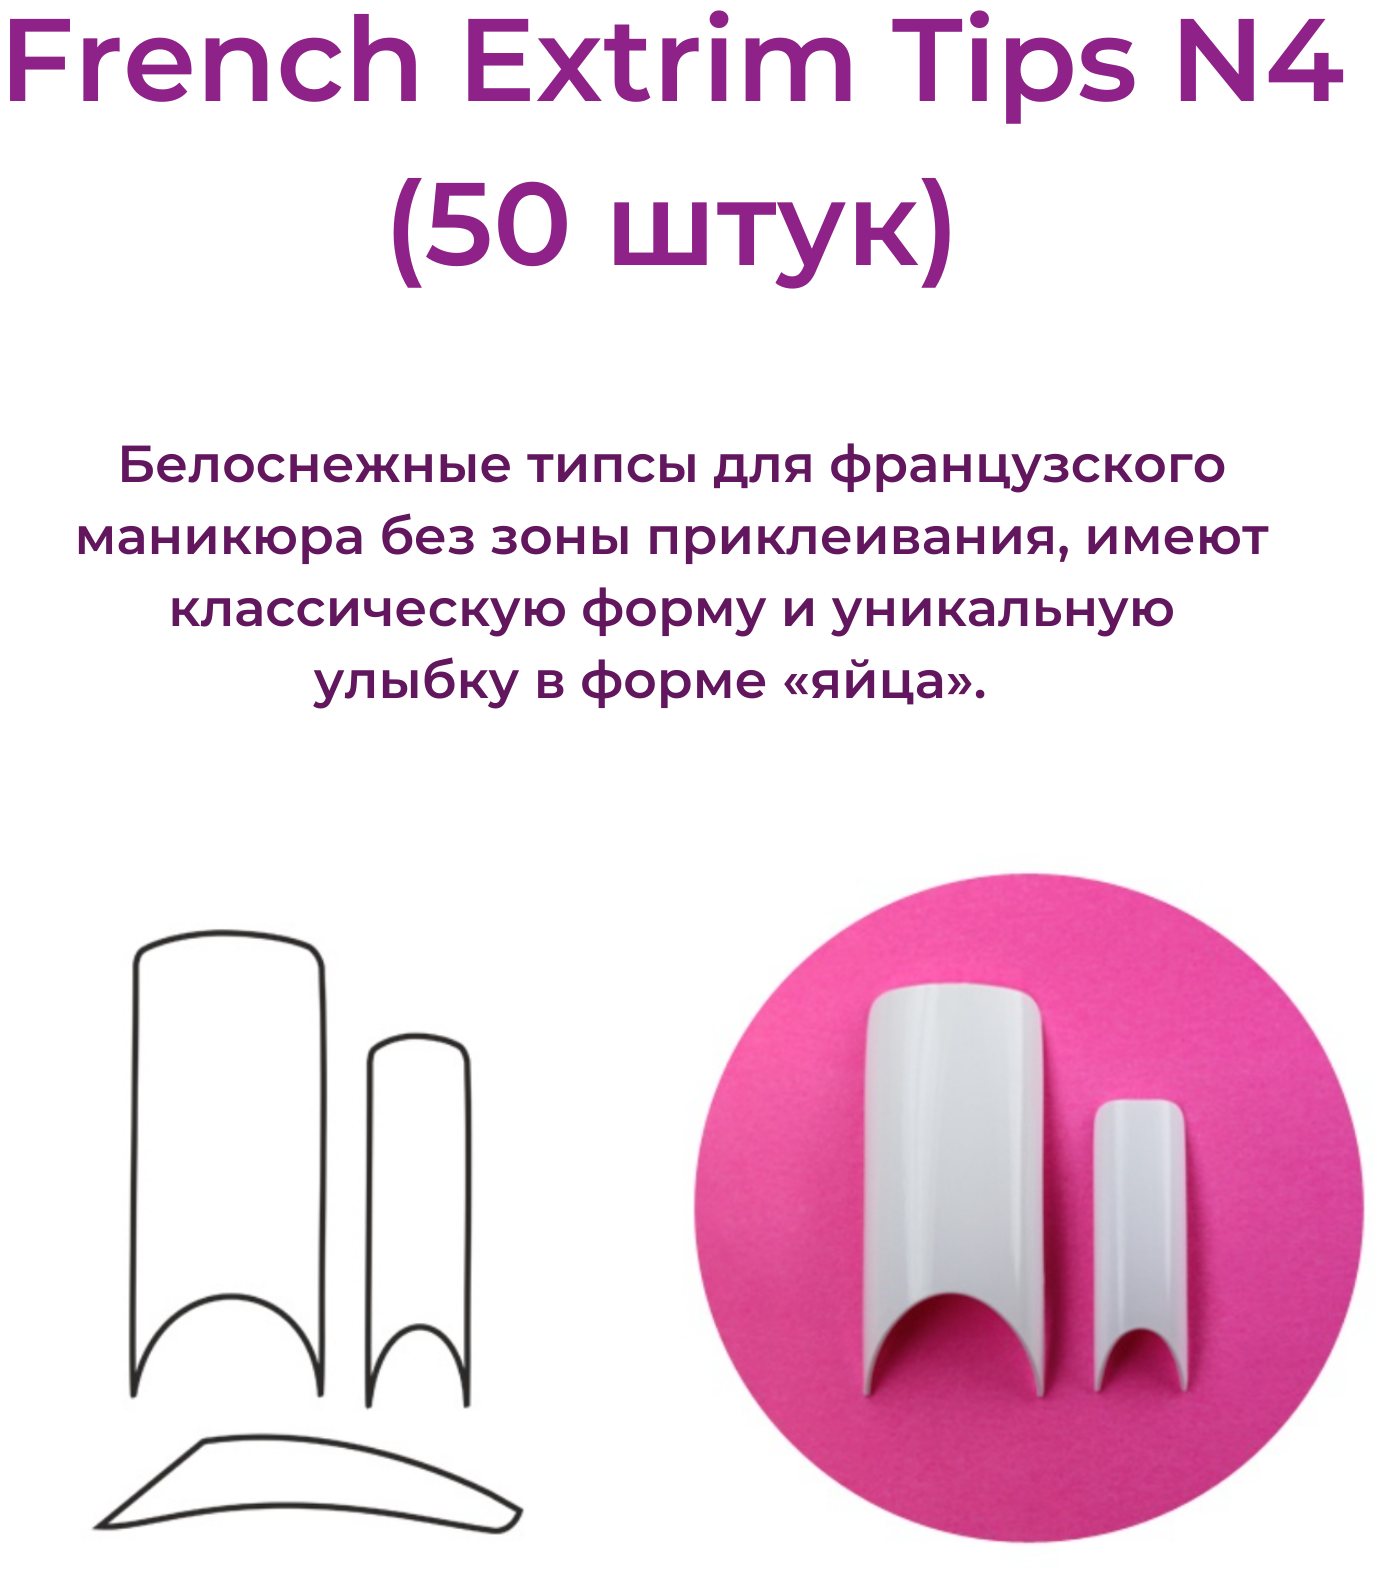 Alex Beauty Concept Типсы French Extrim Tips №4, (50 ШТ)